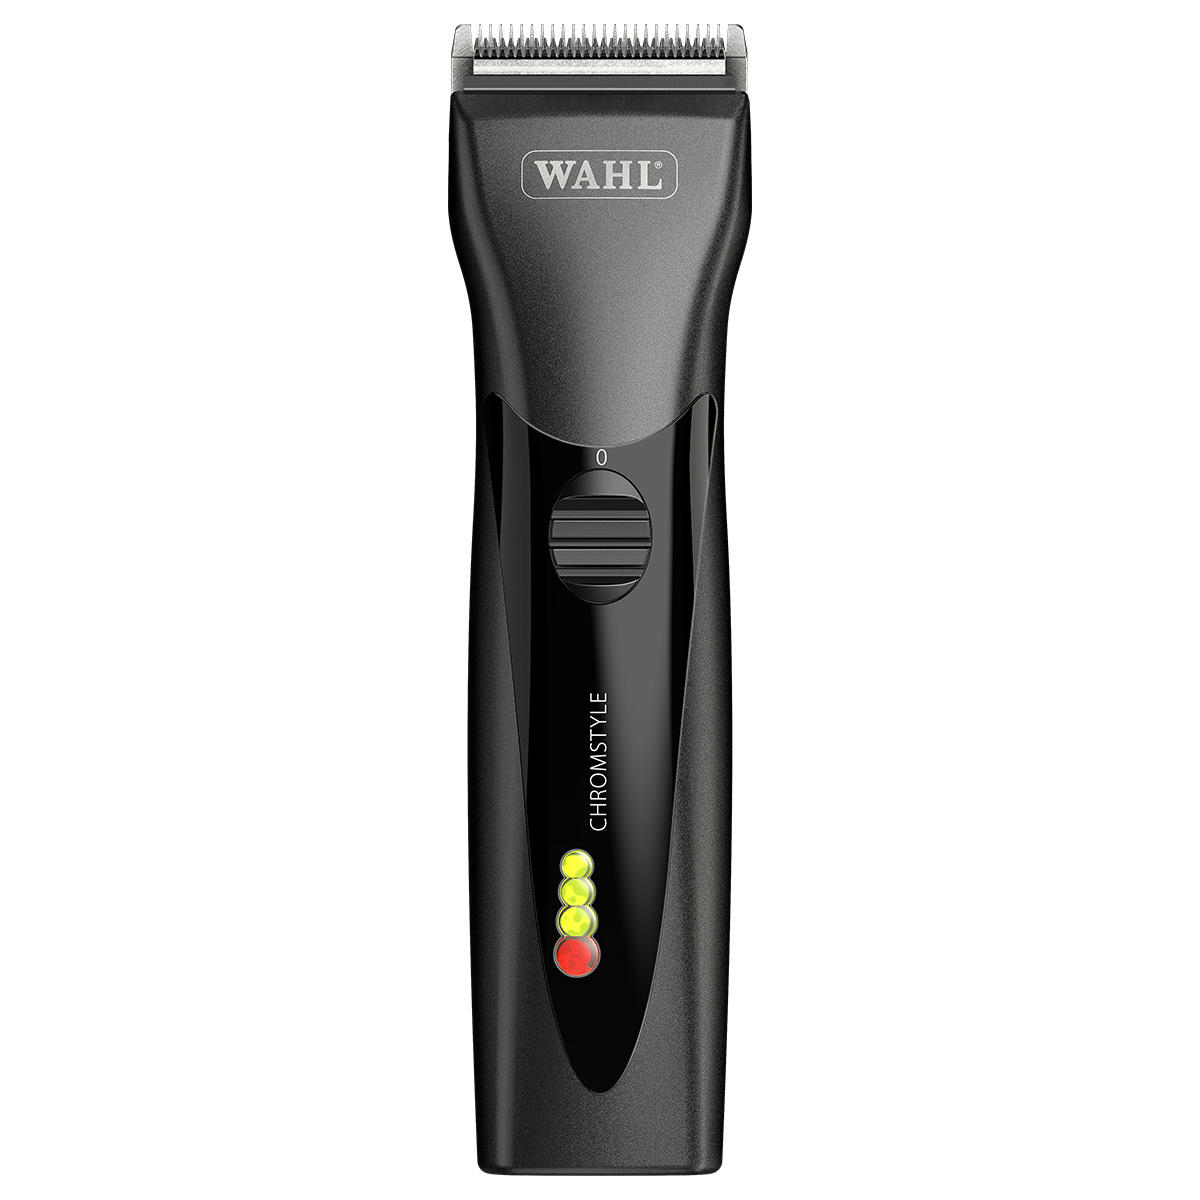 Wahl ChromStyle hair clippers  - 1